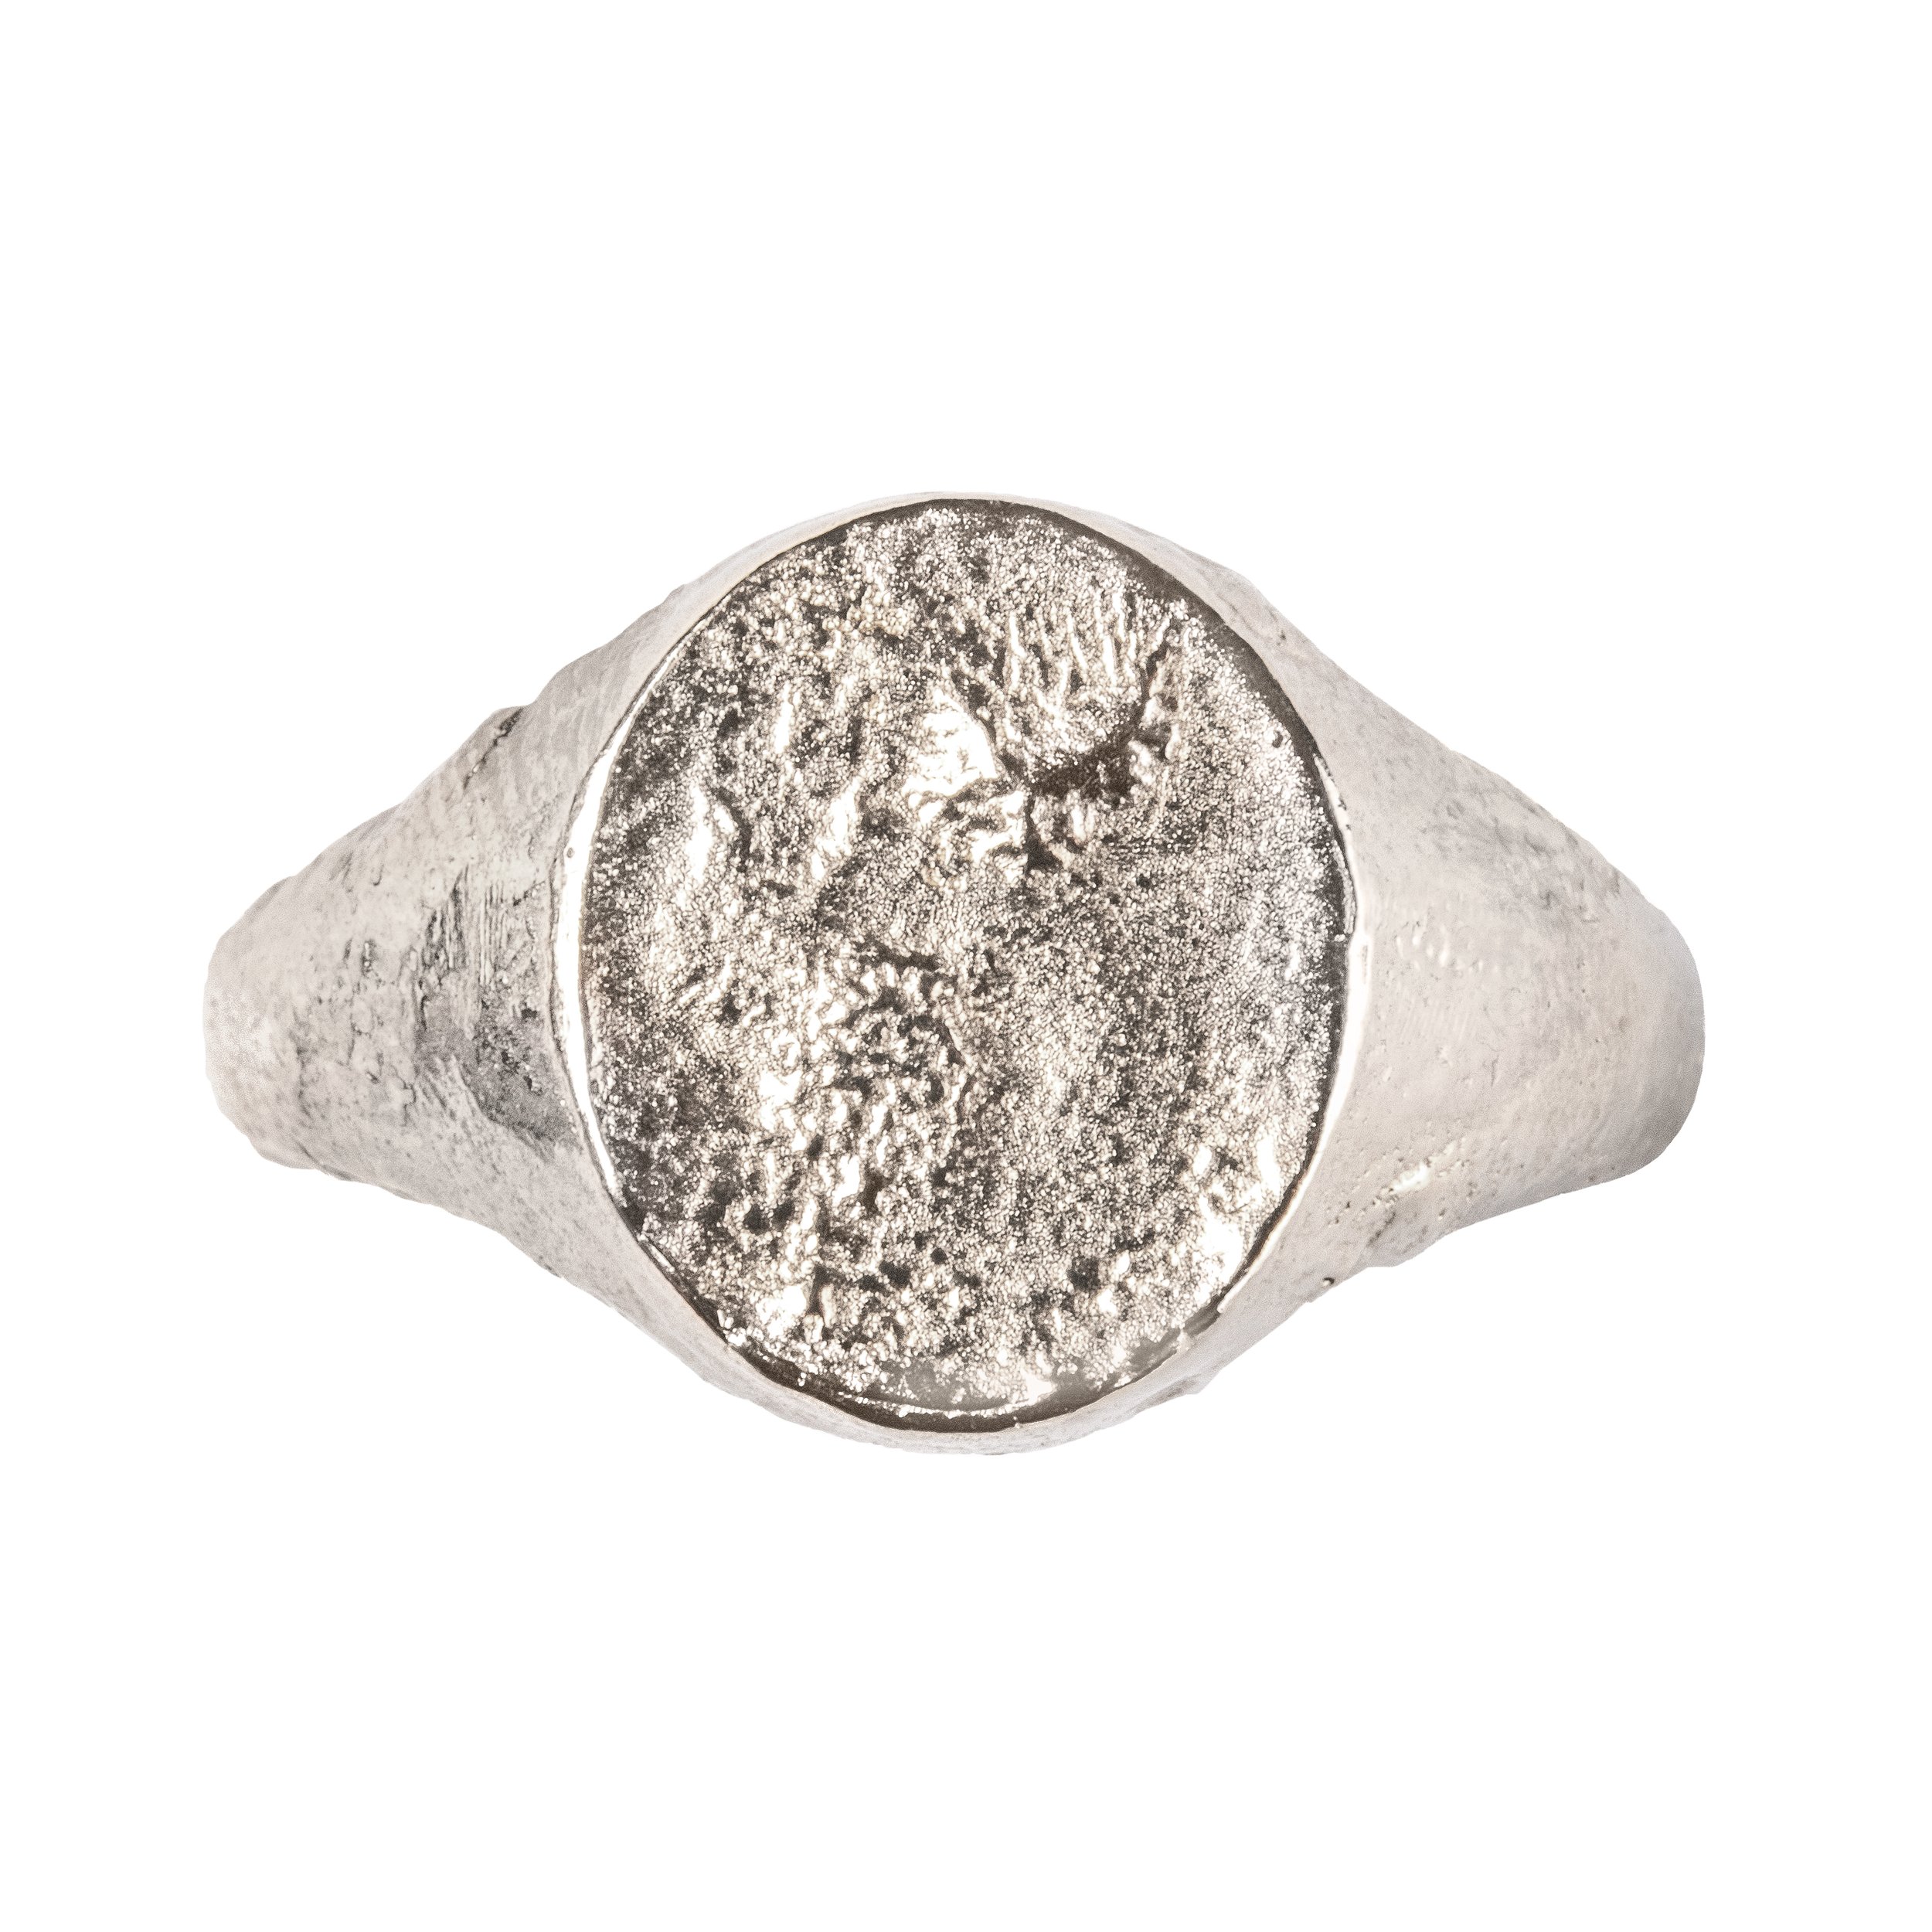 18ct white gold heavy weight signet ring